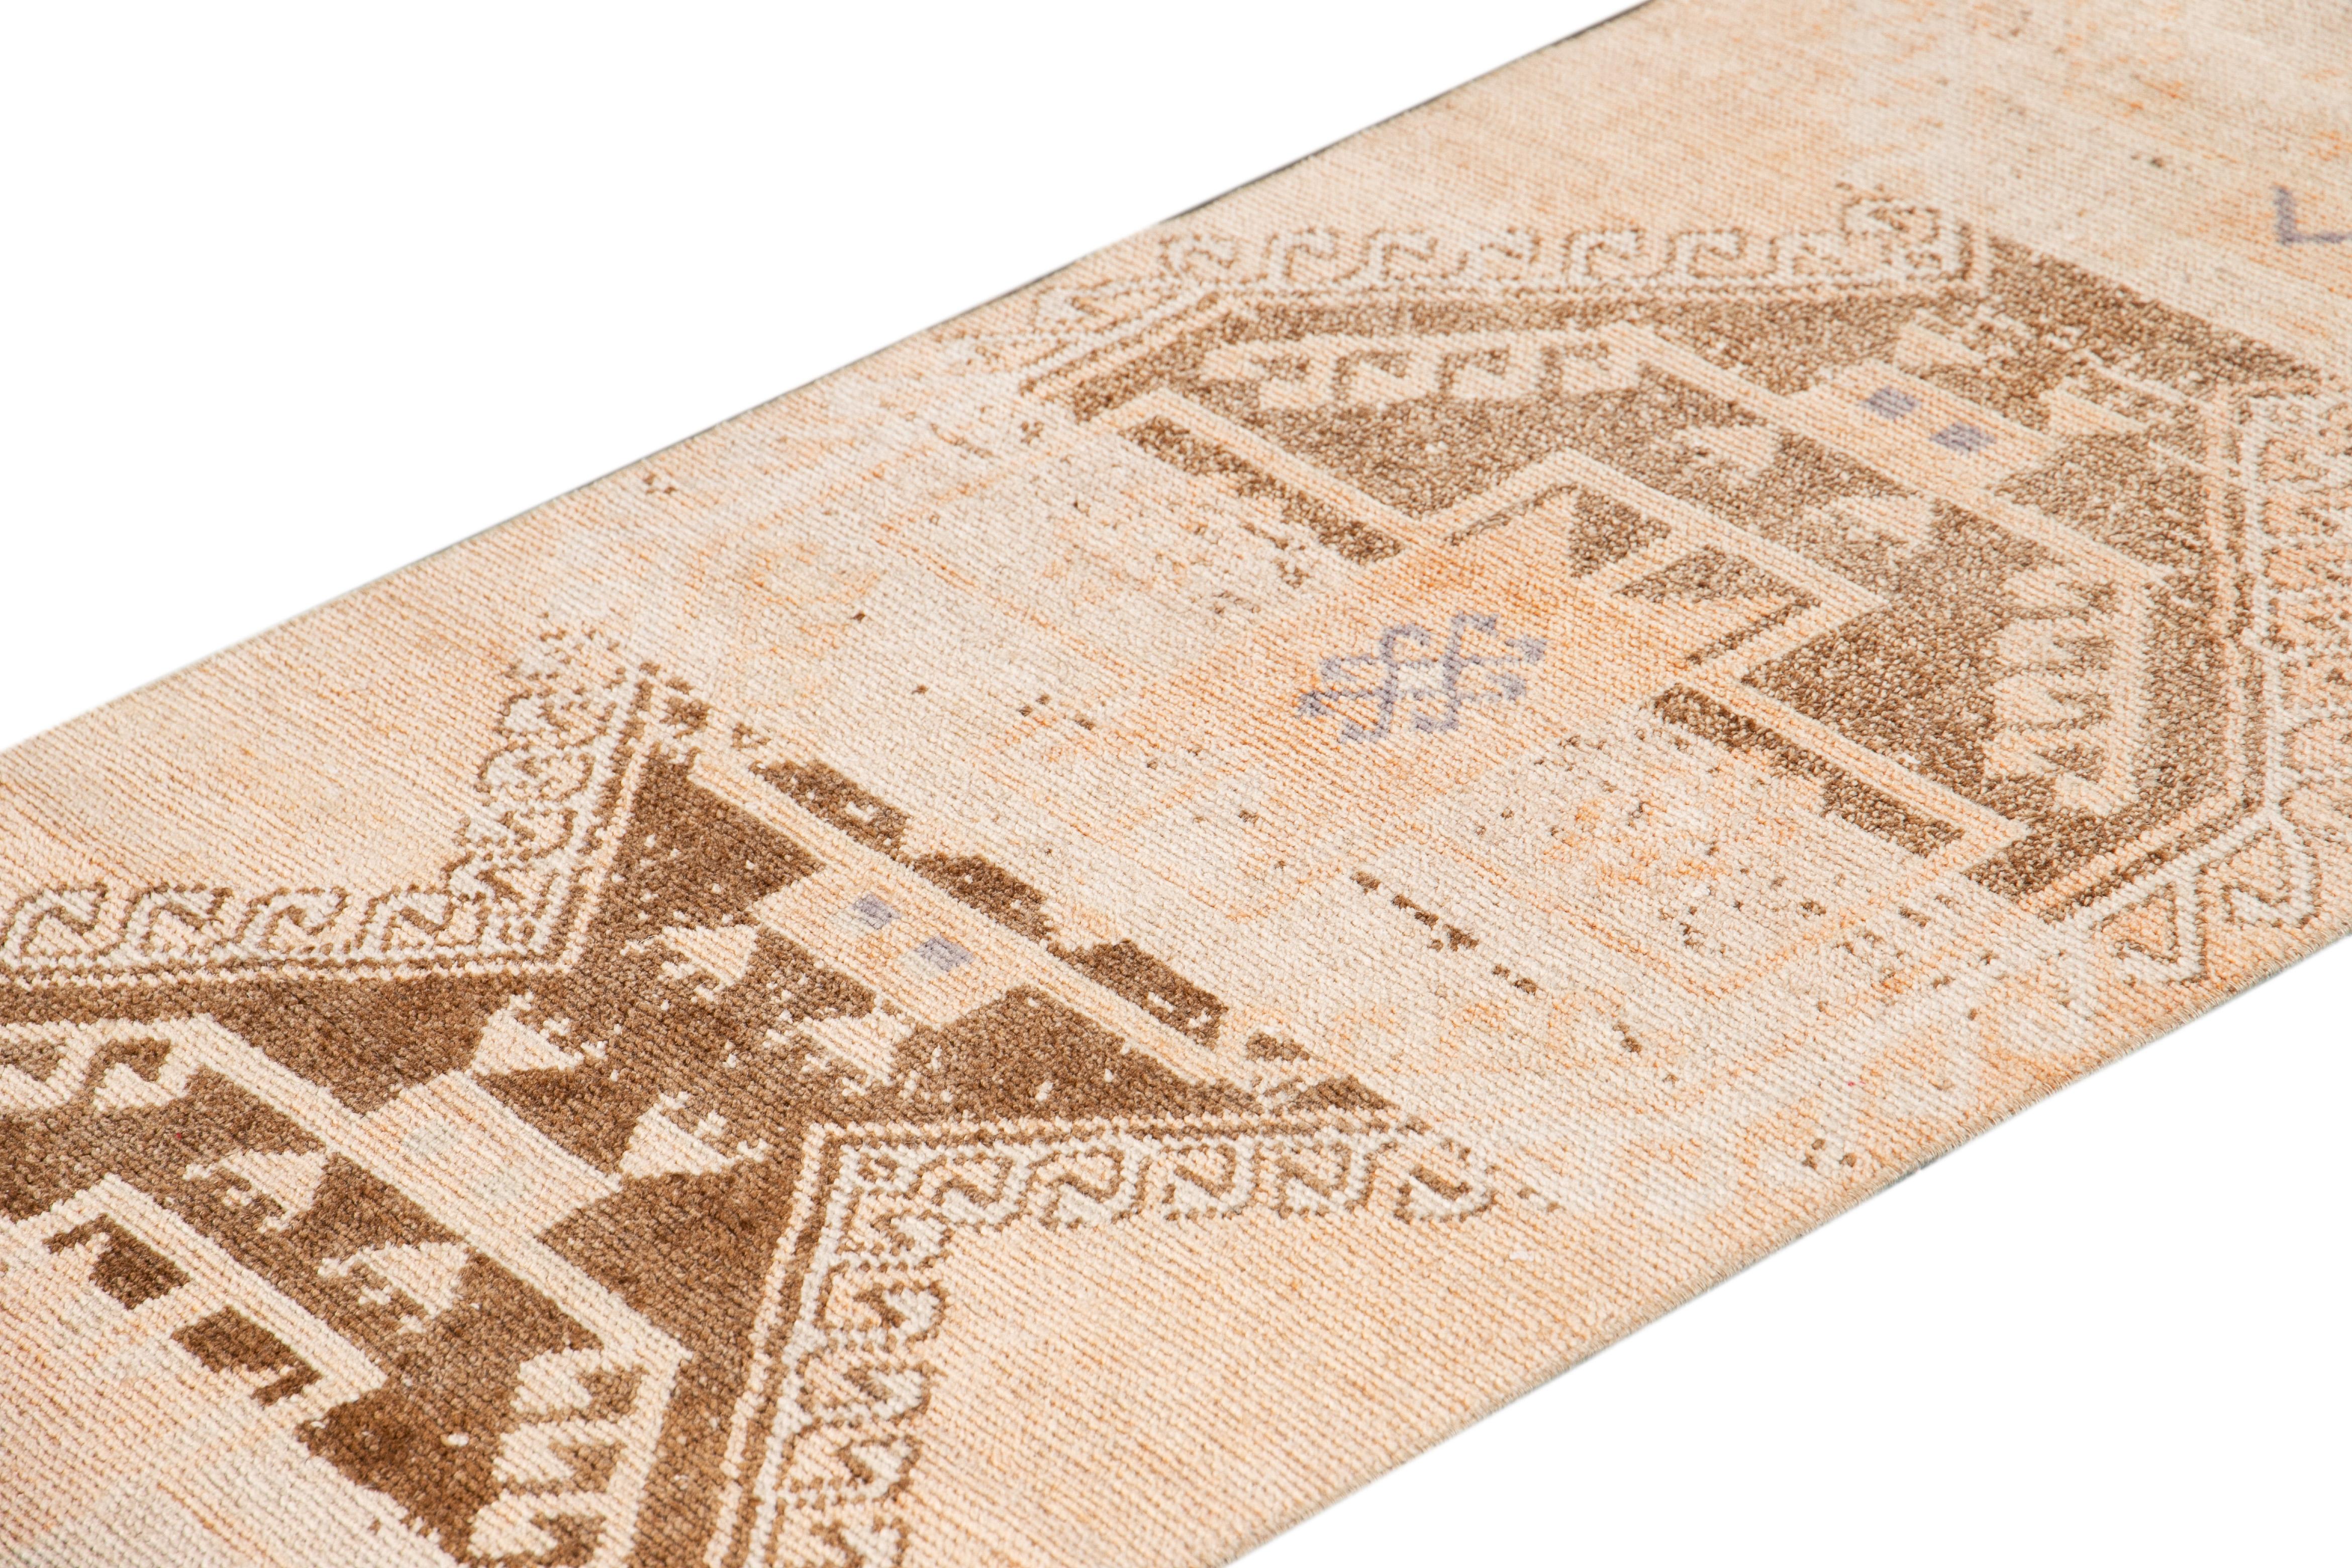 Beautiful Antique Runner rug, hand knotted wool with a light peach field, tan and light brown accents in an all-over multi medallion geometric design.

This rug measures 2' 7